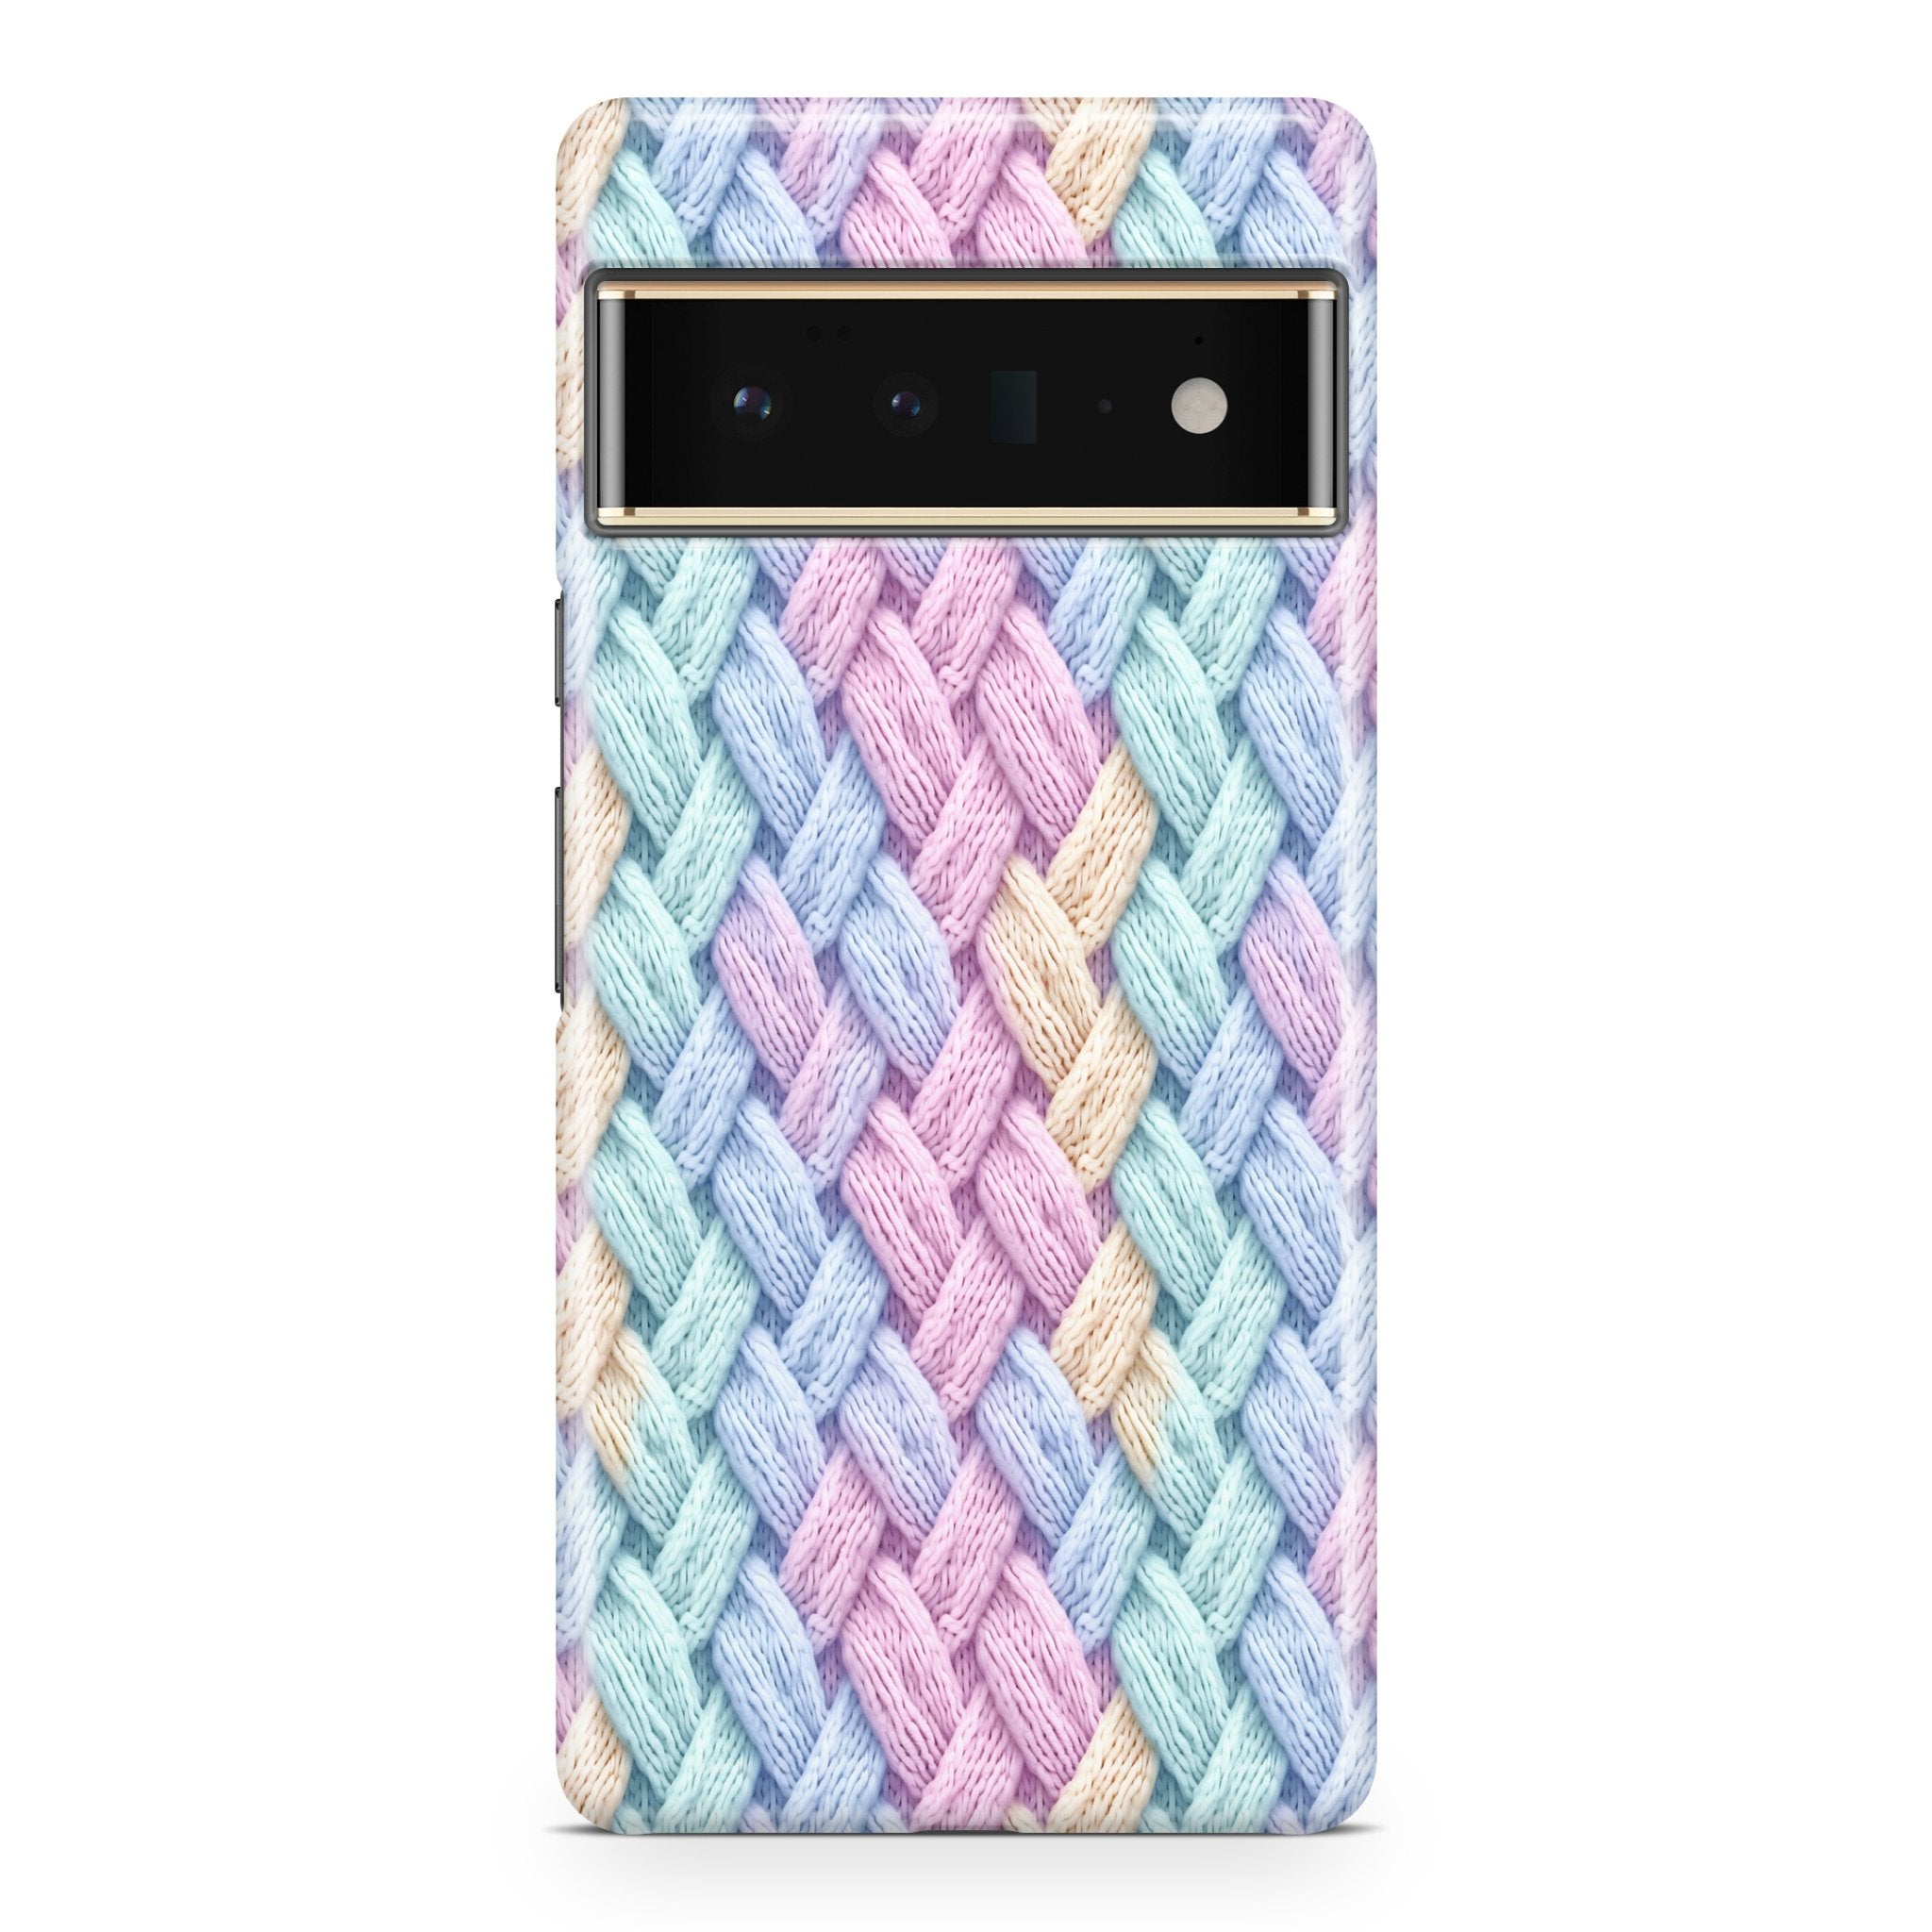 Whimsical Threads - Google phone case designs by CaseSwagger